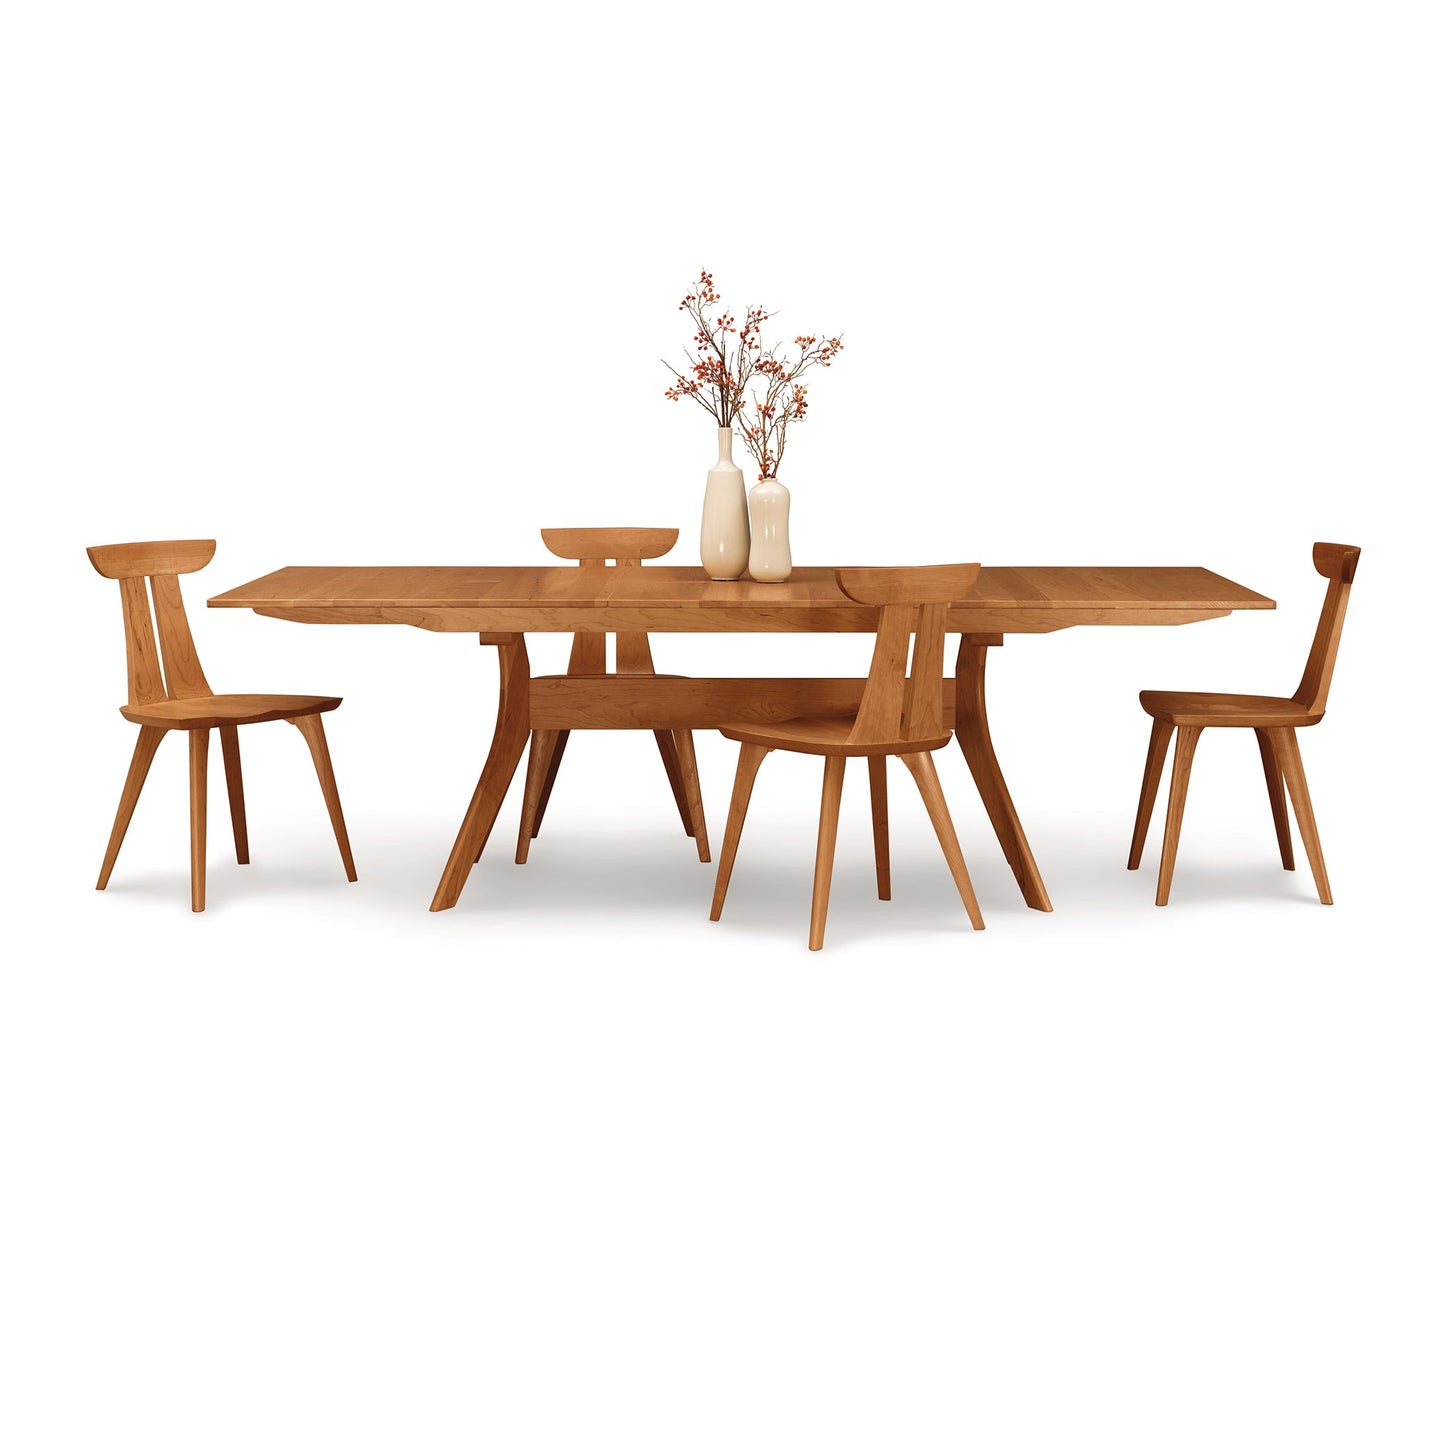 A dining table with four chairs and a vase.